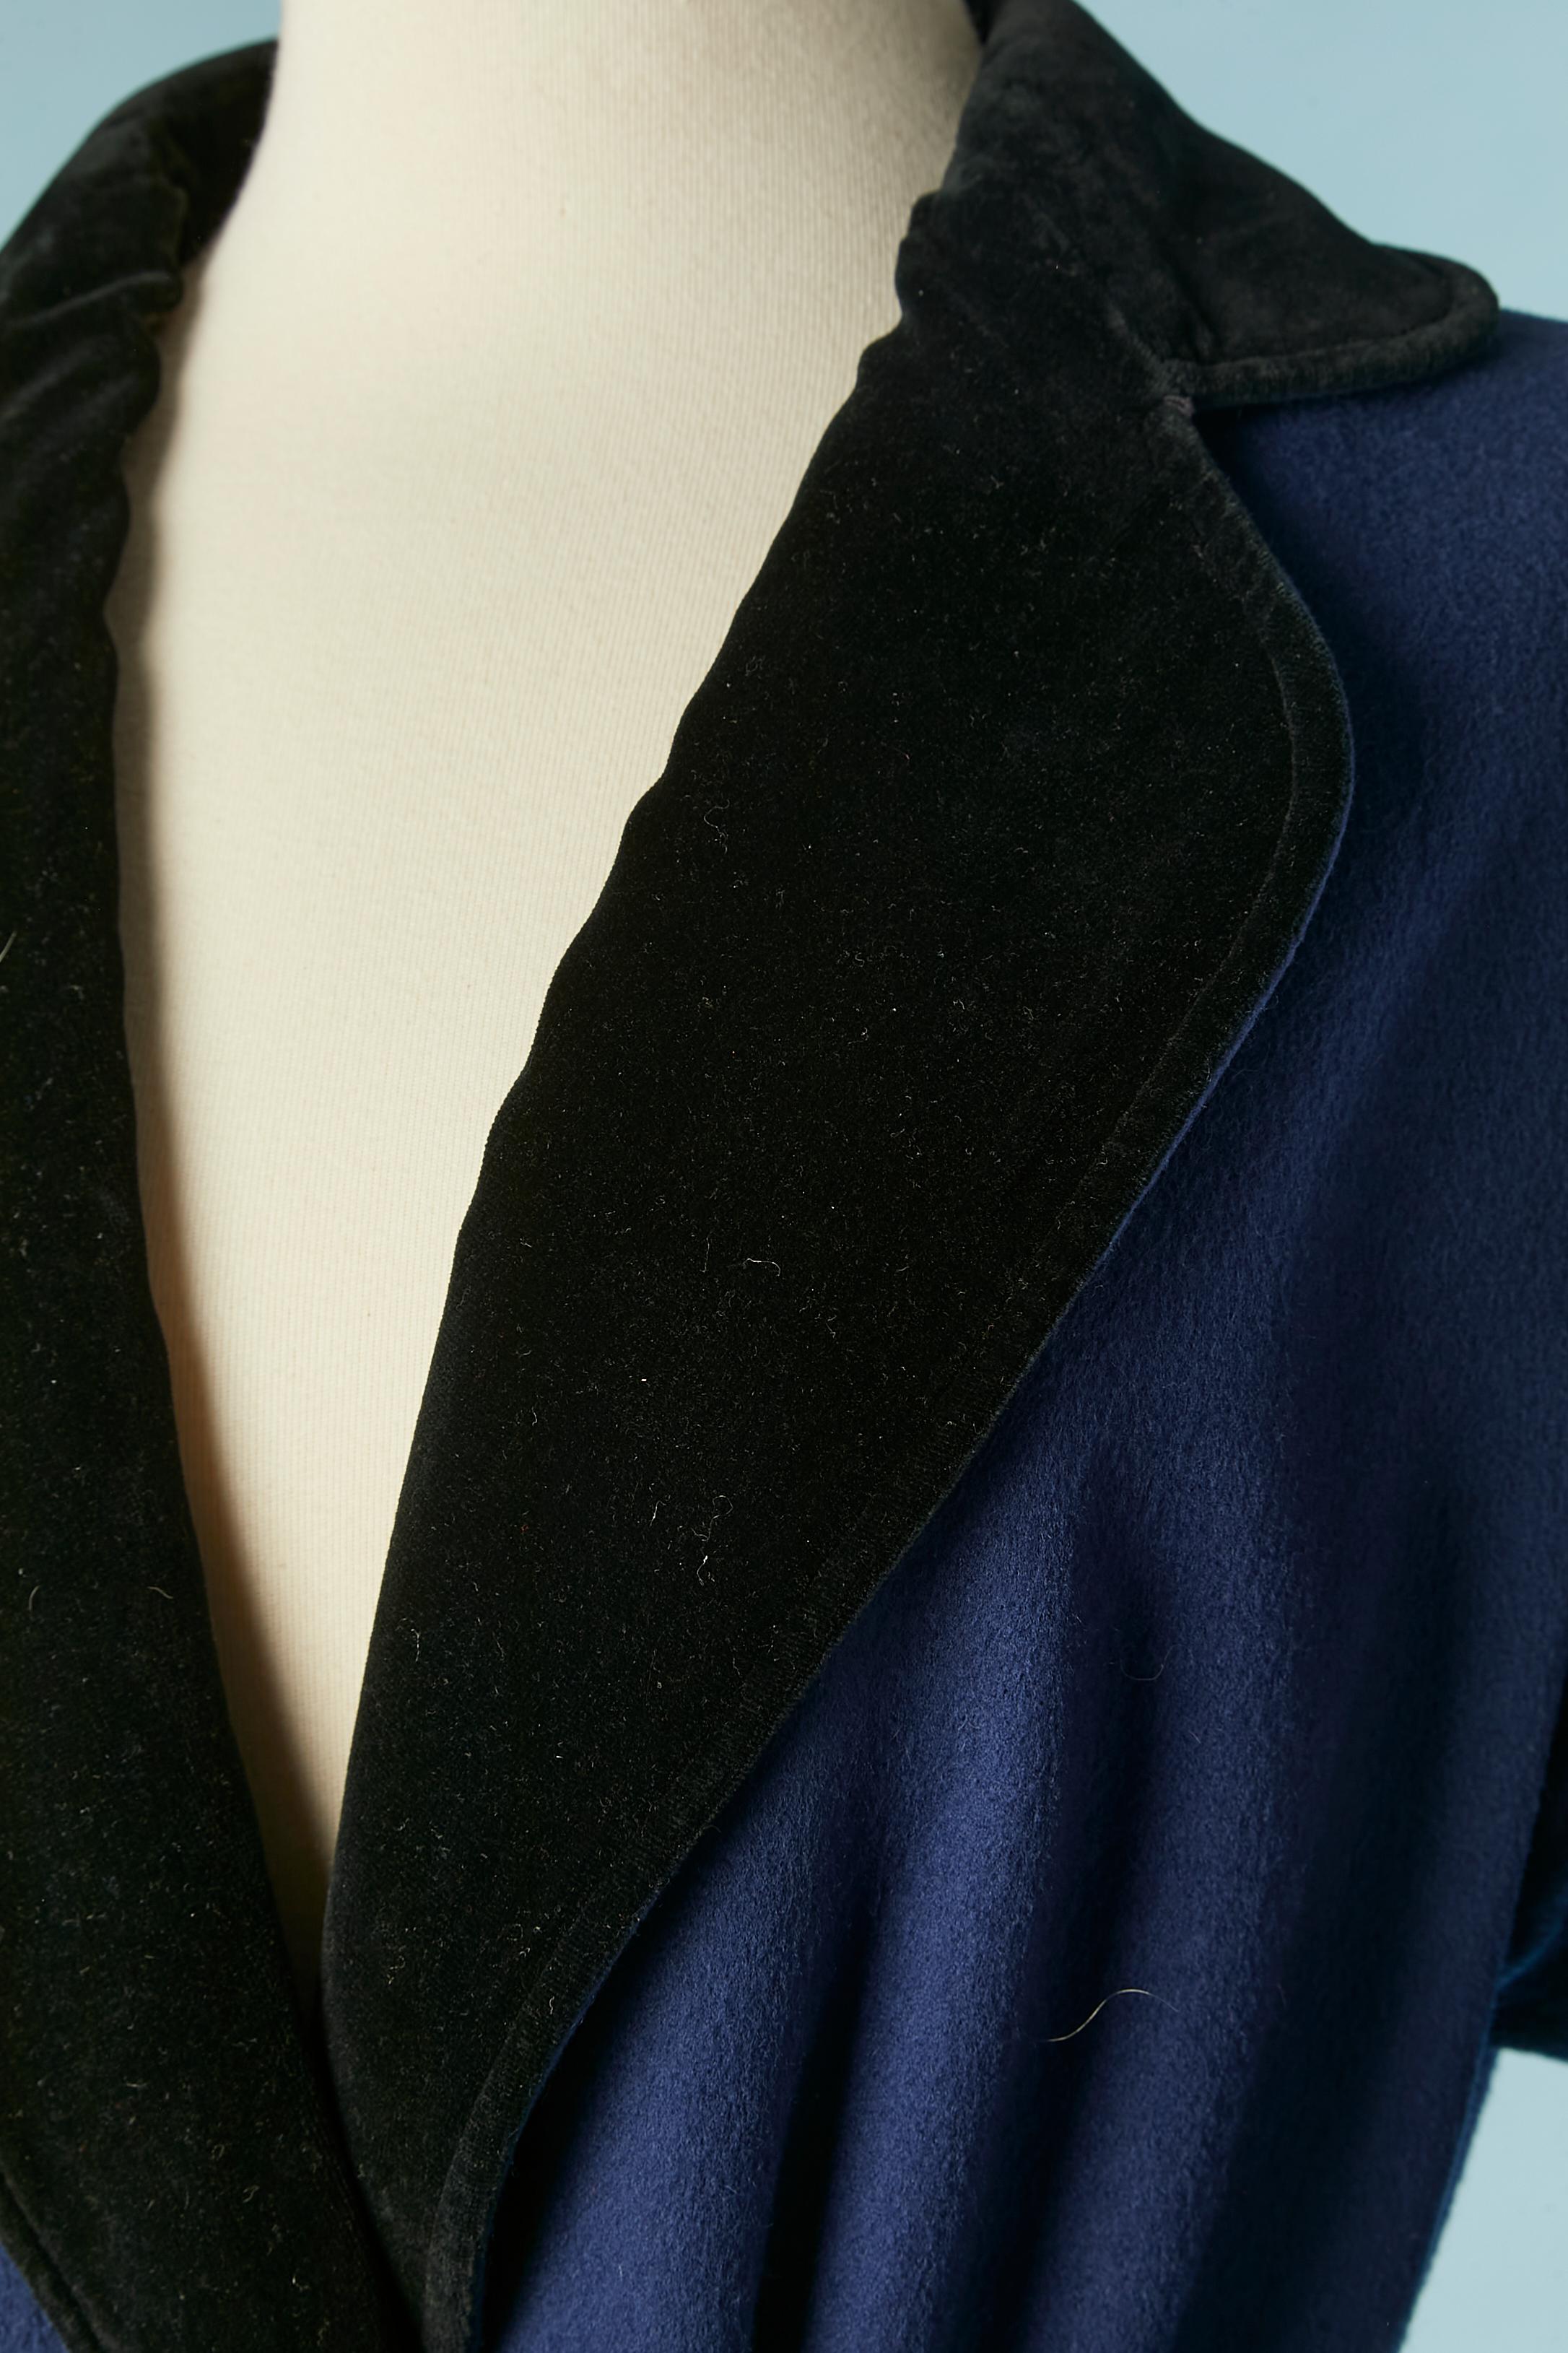 Navy blue wool coat with black velvet details. Velvet belt, lenght= 103 cm
Pockets on both side. 
The tag with fabric composition has been cut but the lining is probably acetate or rayon. 
SIZE 36 (Fr) on tag but fit M 
